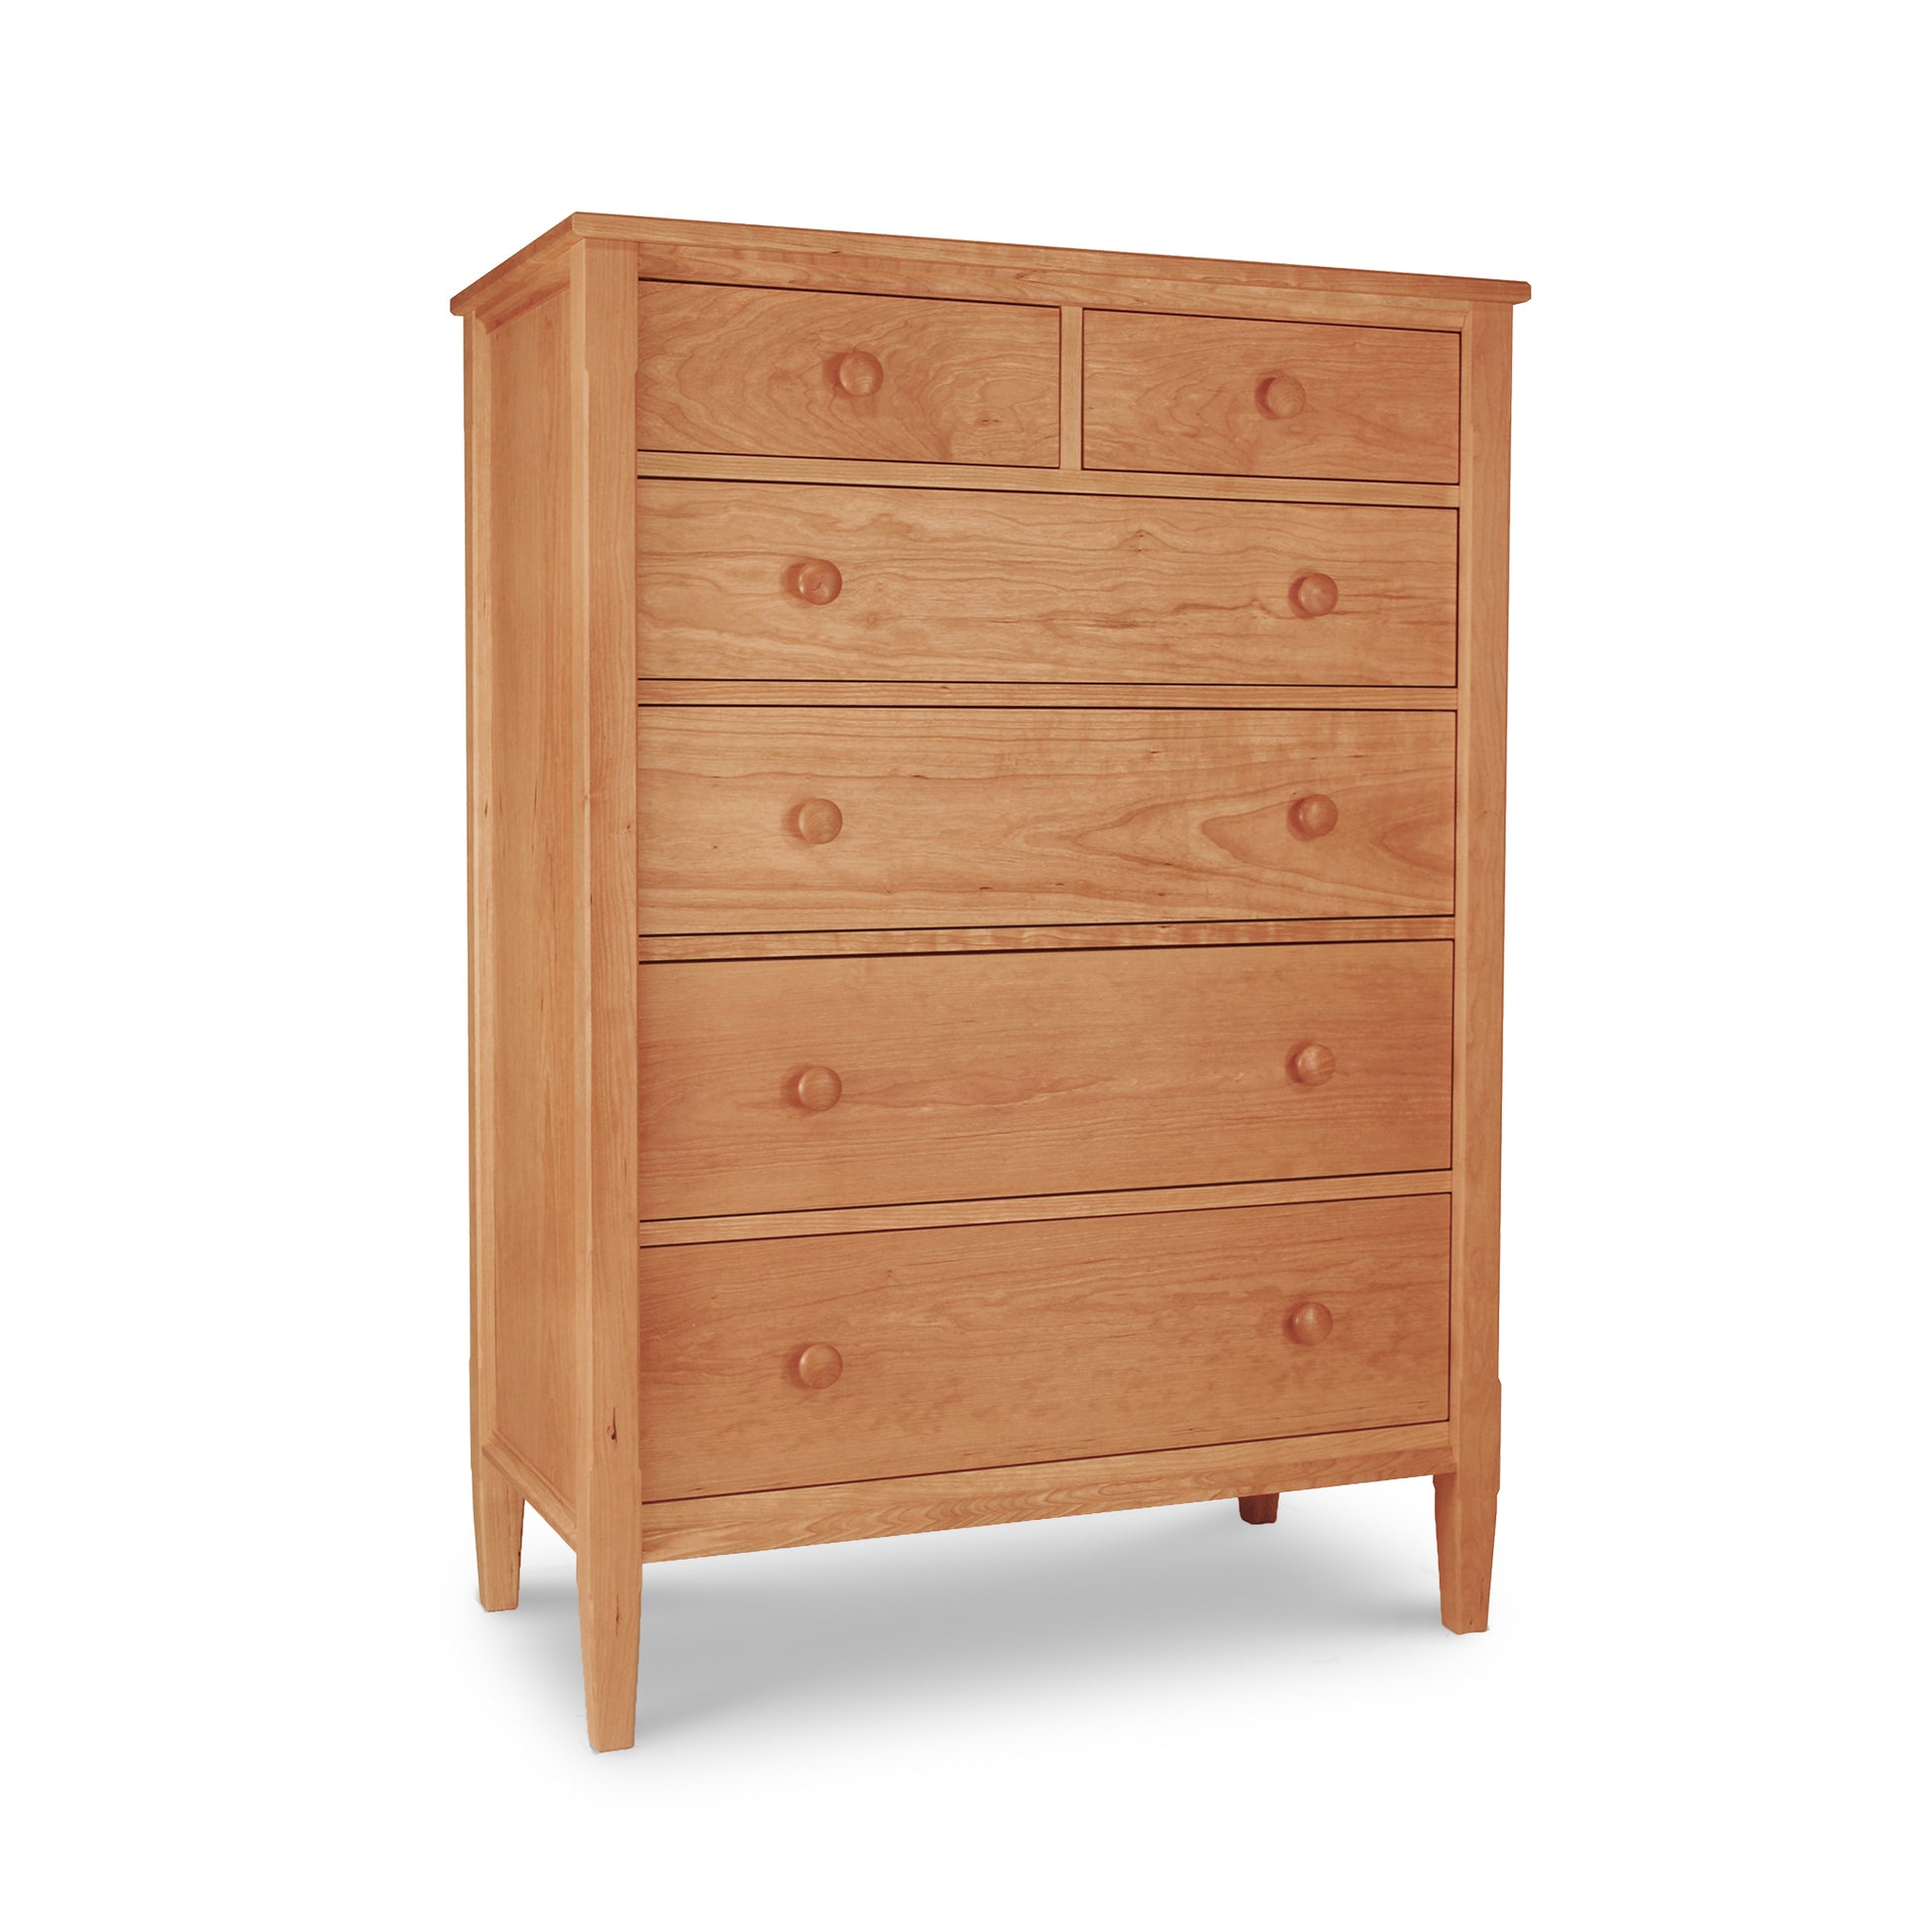 A Maple Corner Woodworks Vermont Shaker 6-Drawer Chest made of hardwoods, perfect for bedroom storage, on a white background.